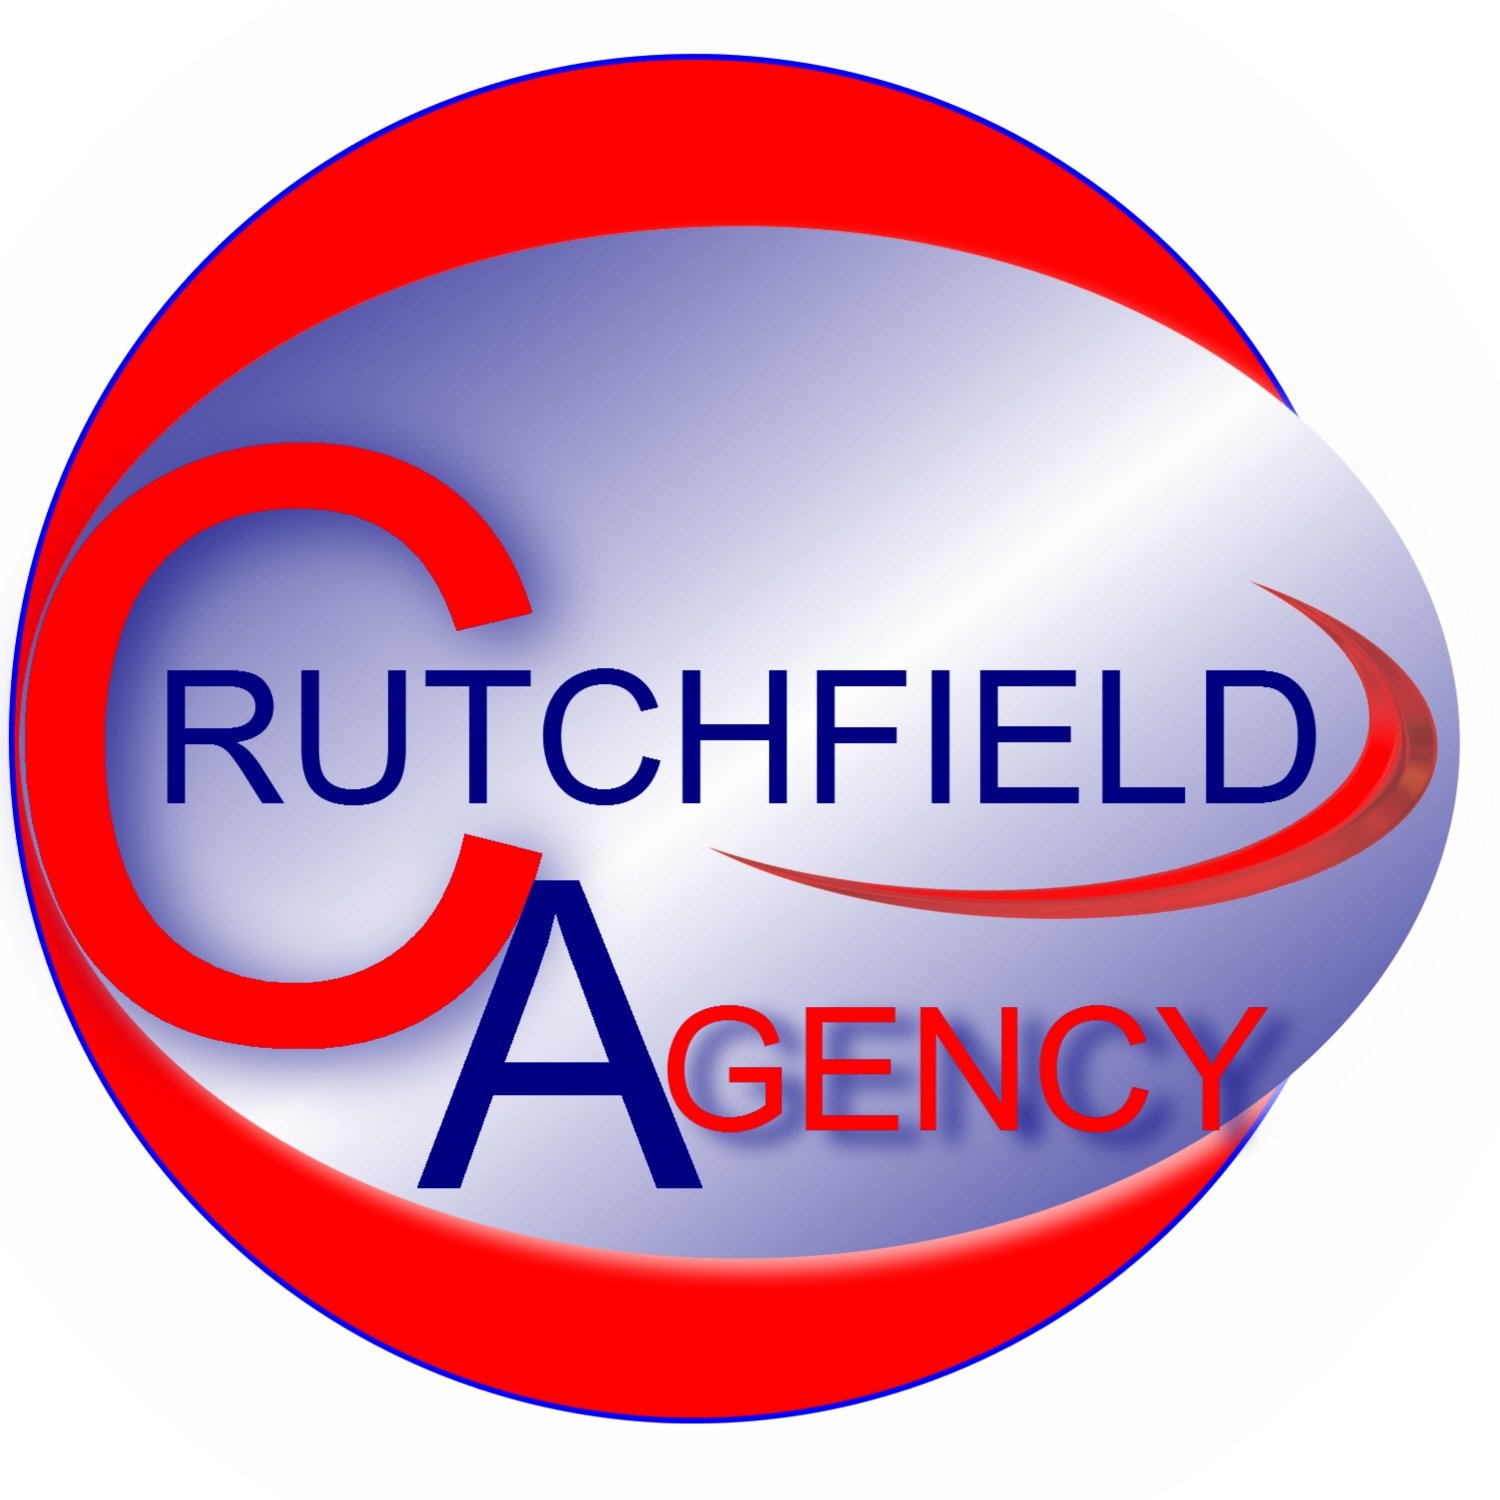  Crutchfield Agency, LLC - A Criminal Justice Agency / The Office of Reggie N. Paige